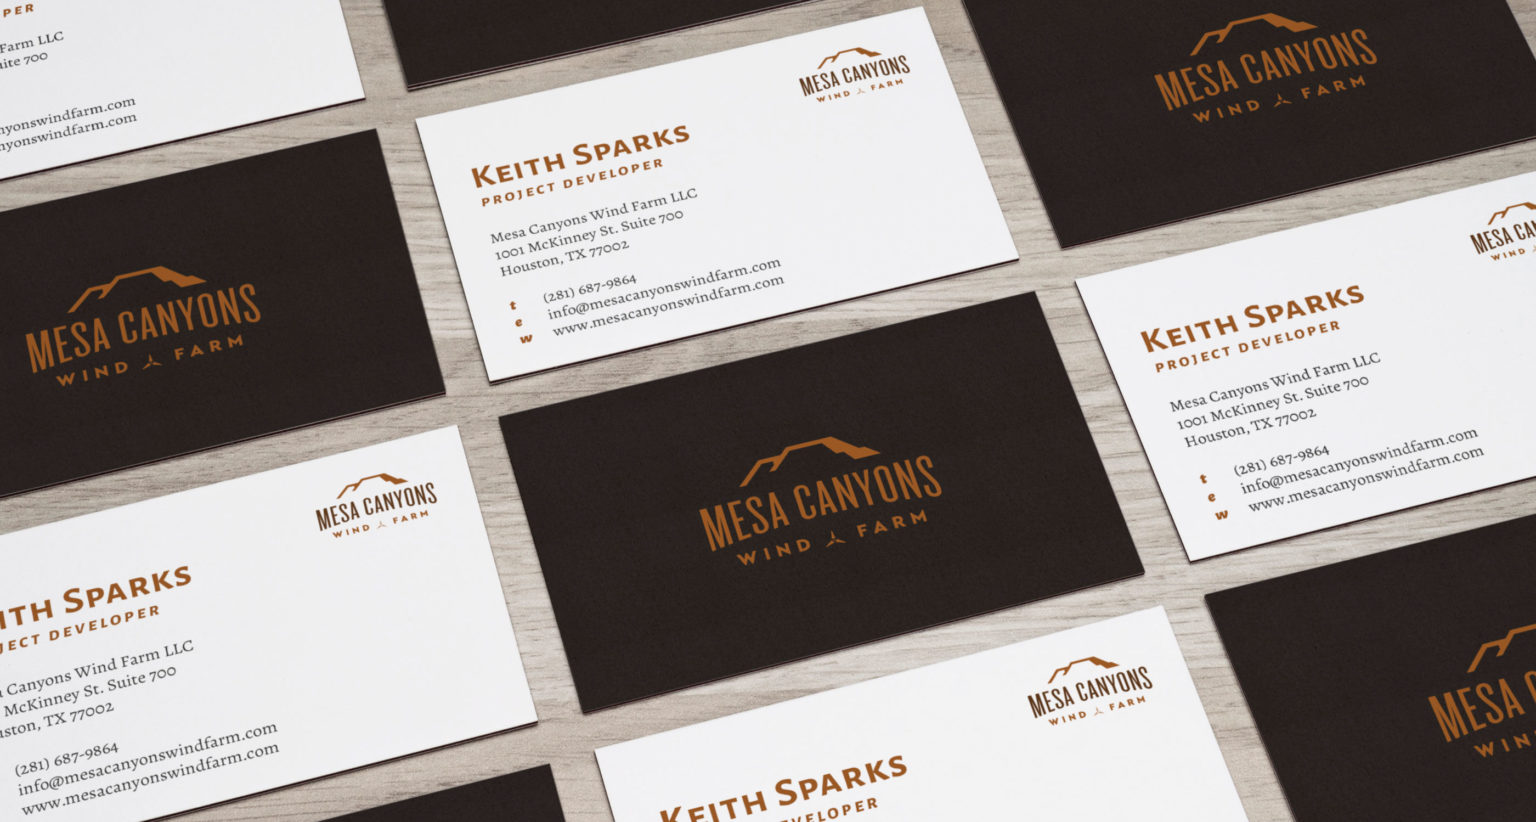 Mesa Canyons business cards